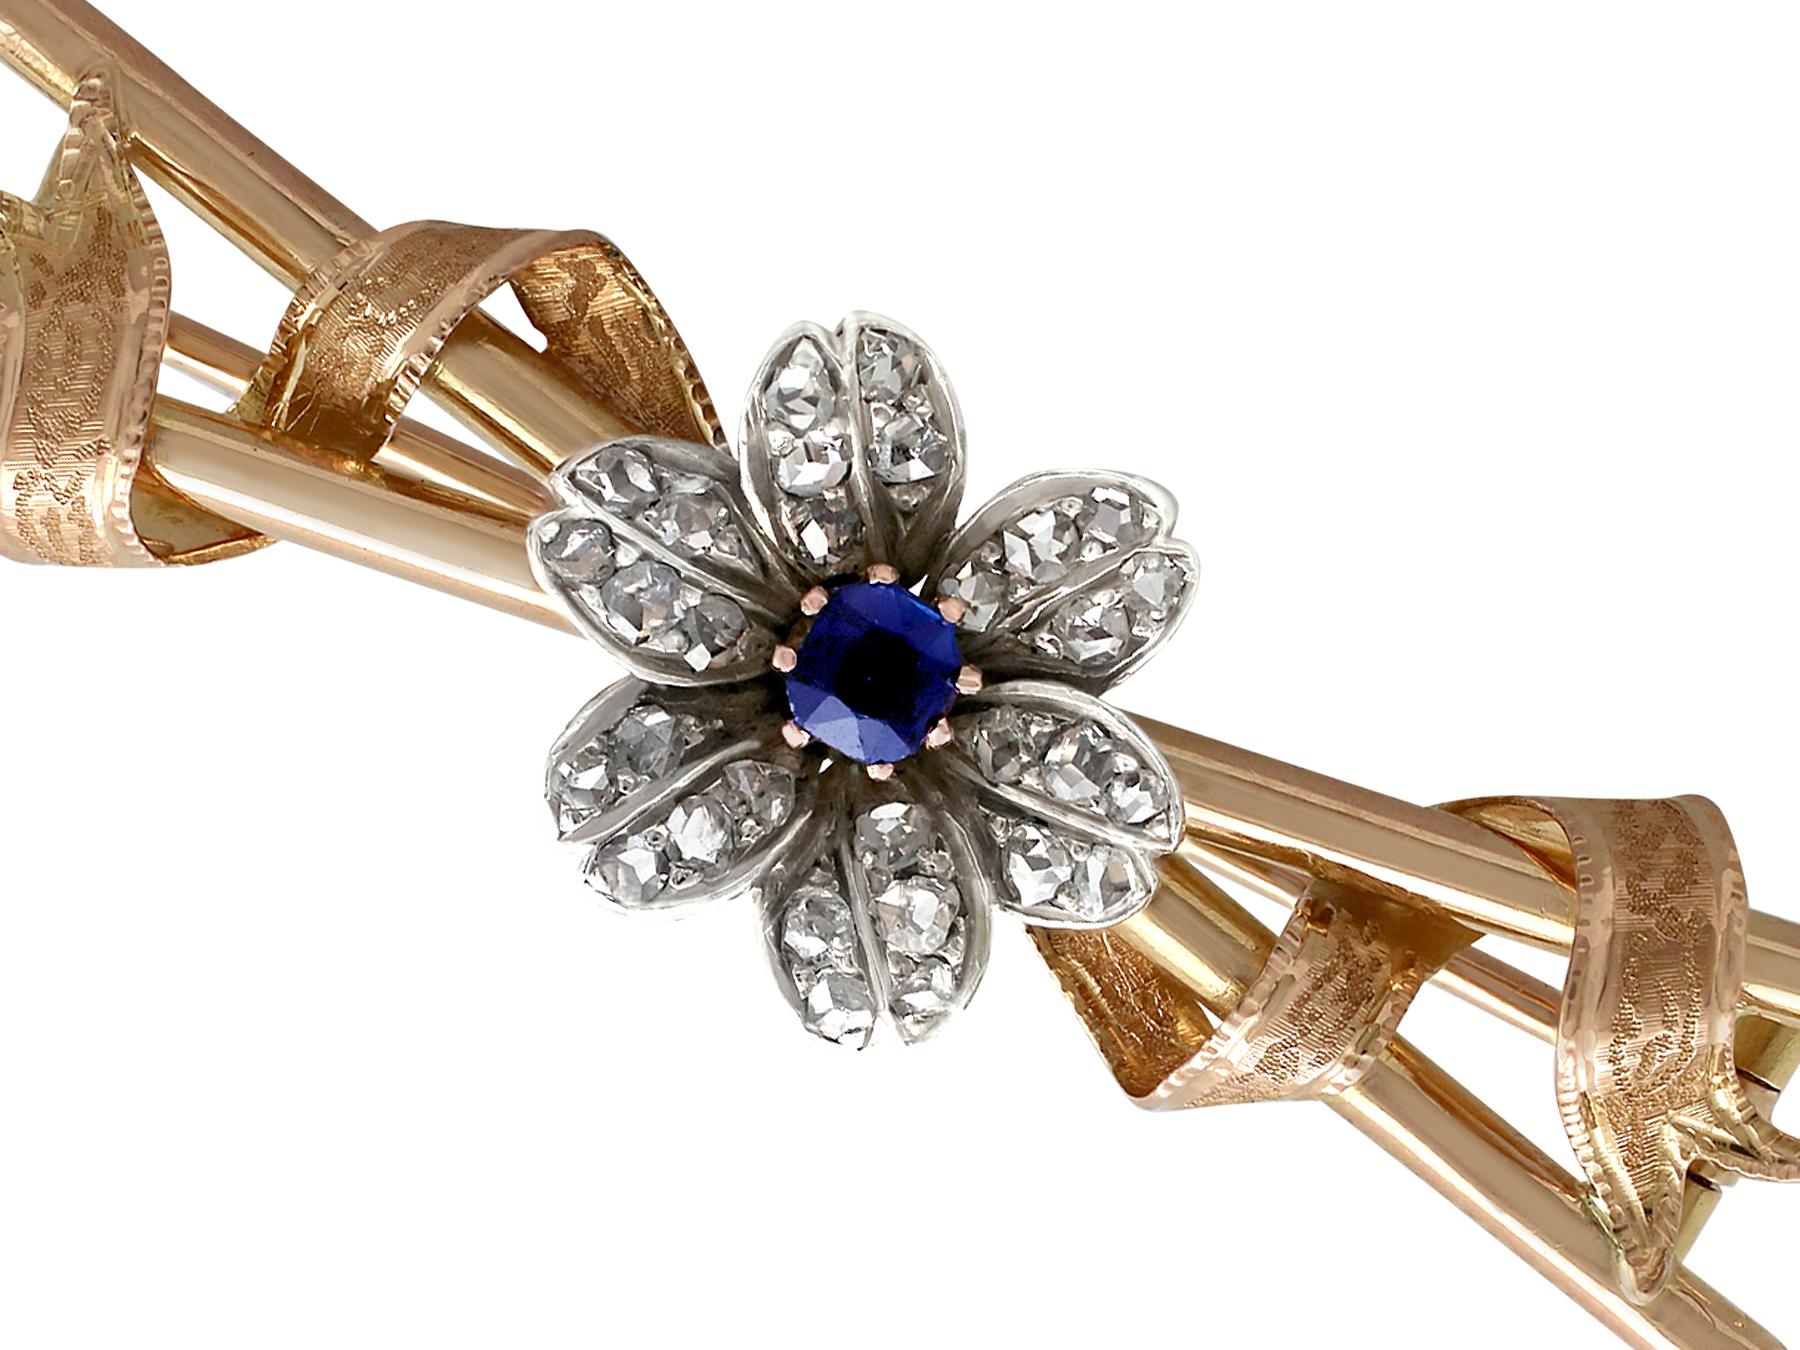 An impressive antique Victorian 0.22 carat sapphire and 0.48 carat diamond, 18 karat rose gold and silver set brooch; part of our diverse antique jewelry and estate jewelry collections.

This stunning, fine and impressive antique sapphire brooch has